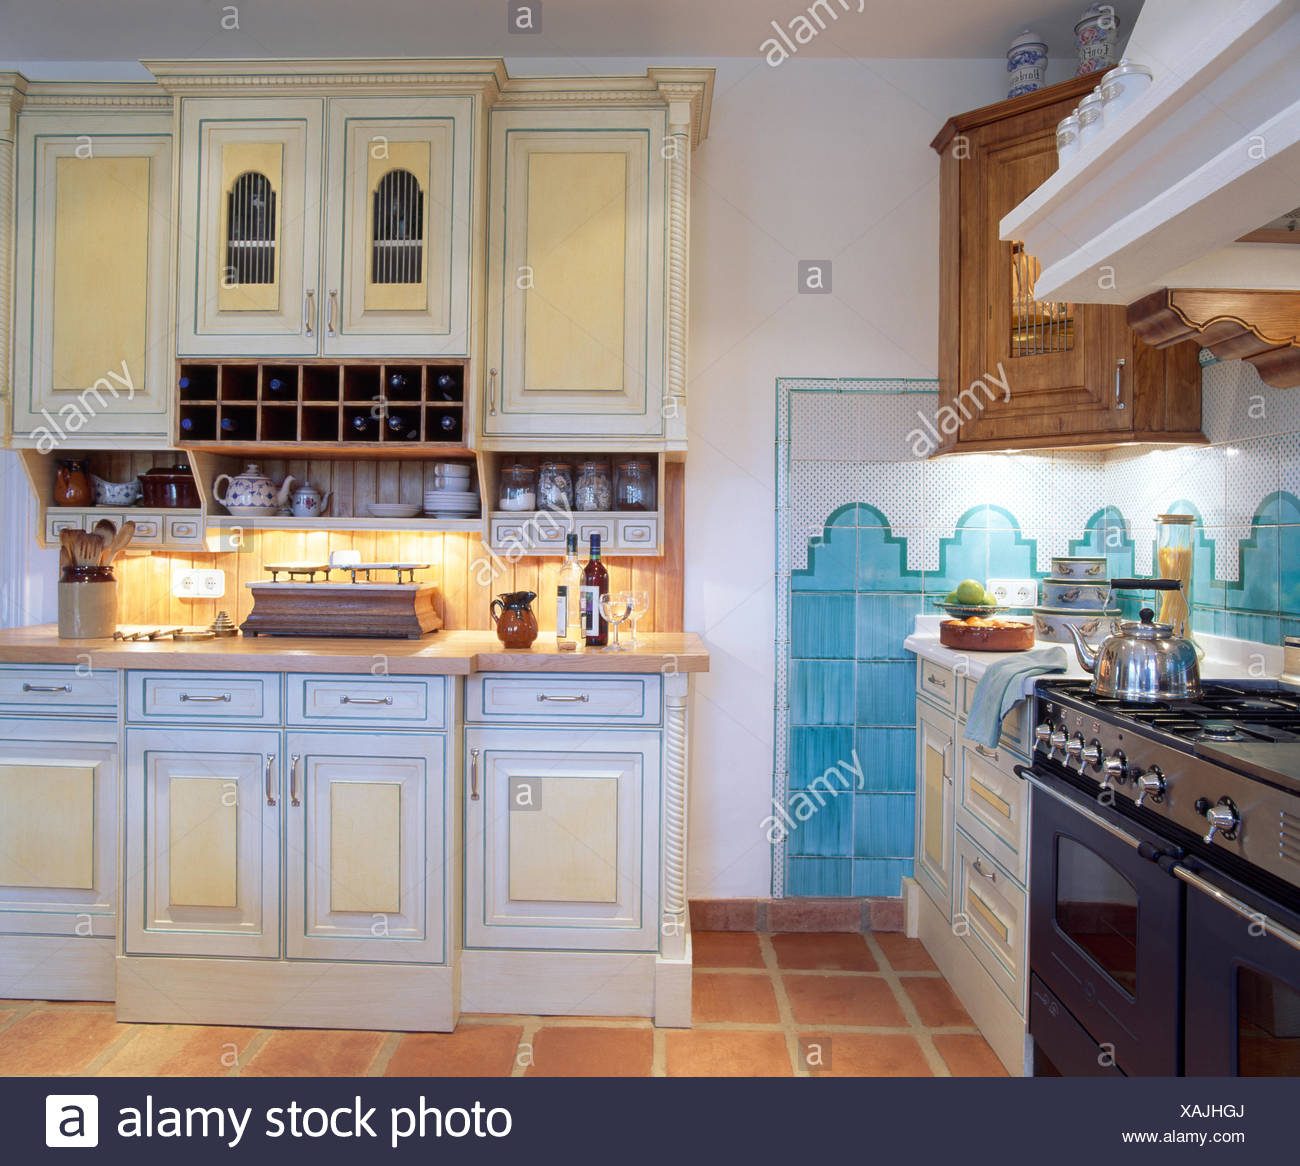 Painted Fitted Dresser In Spanish Kitchen Stock Photo 281921378